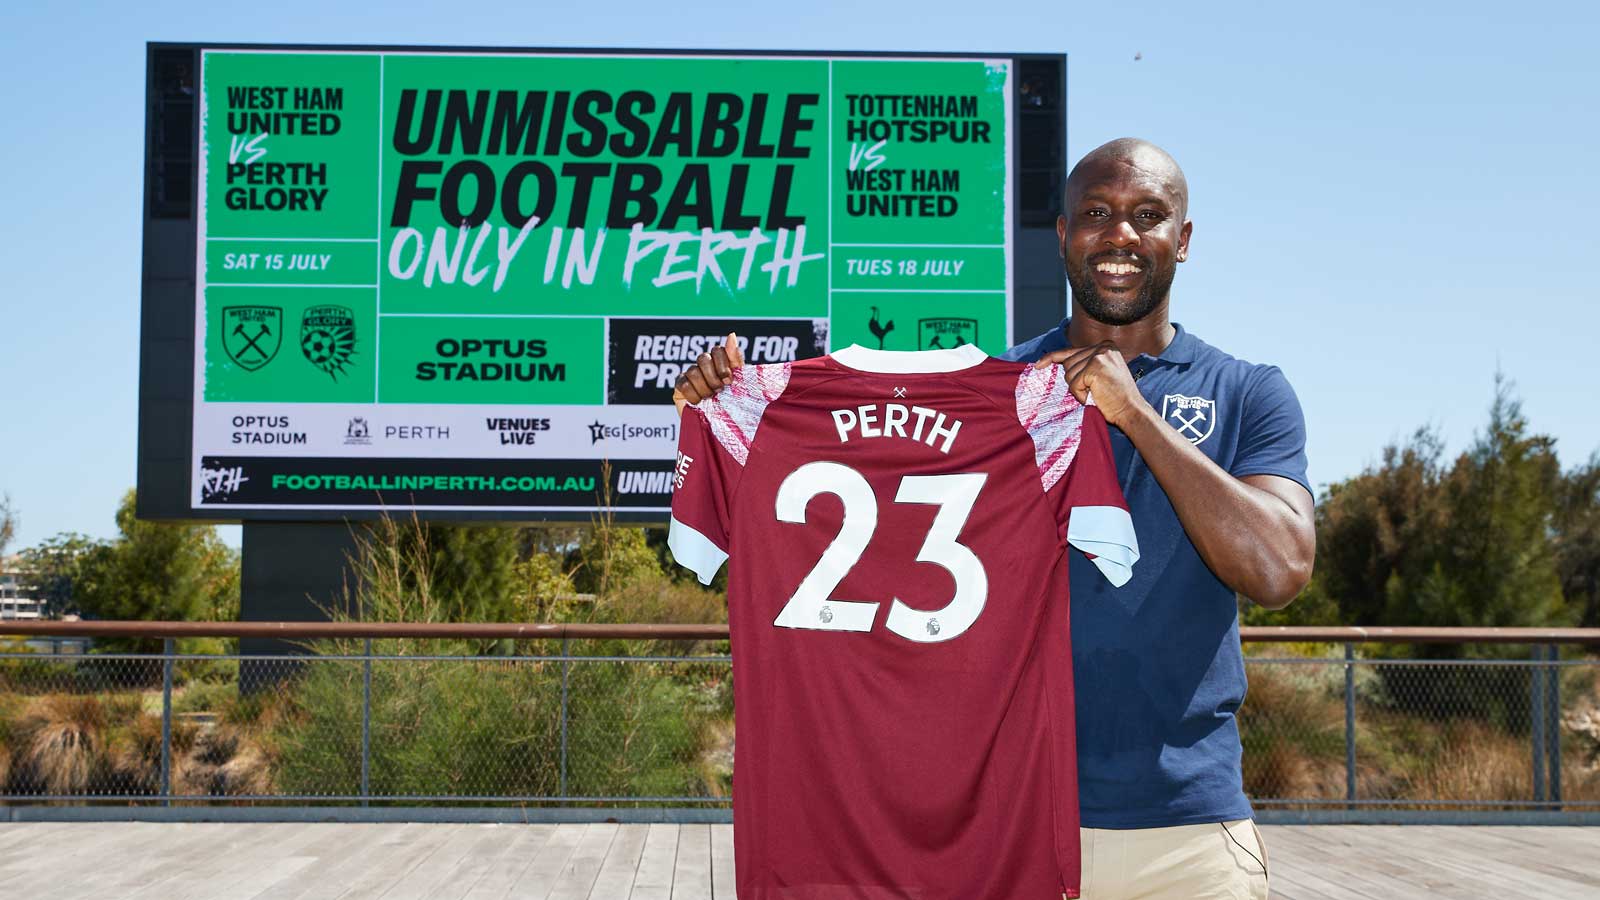 Carlton Cole holds up a West Ham shirt in Perth